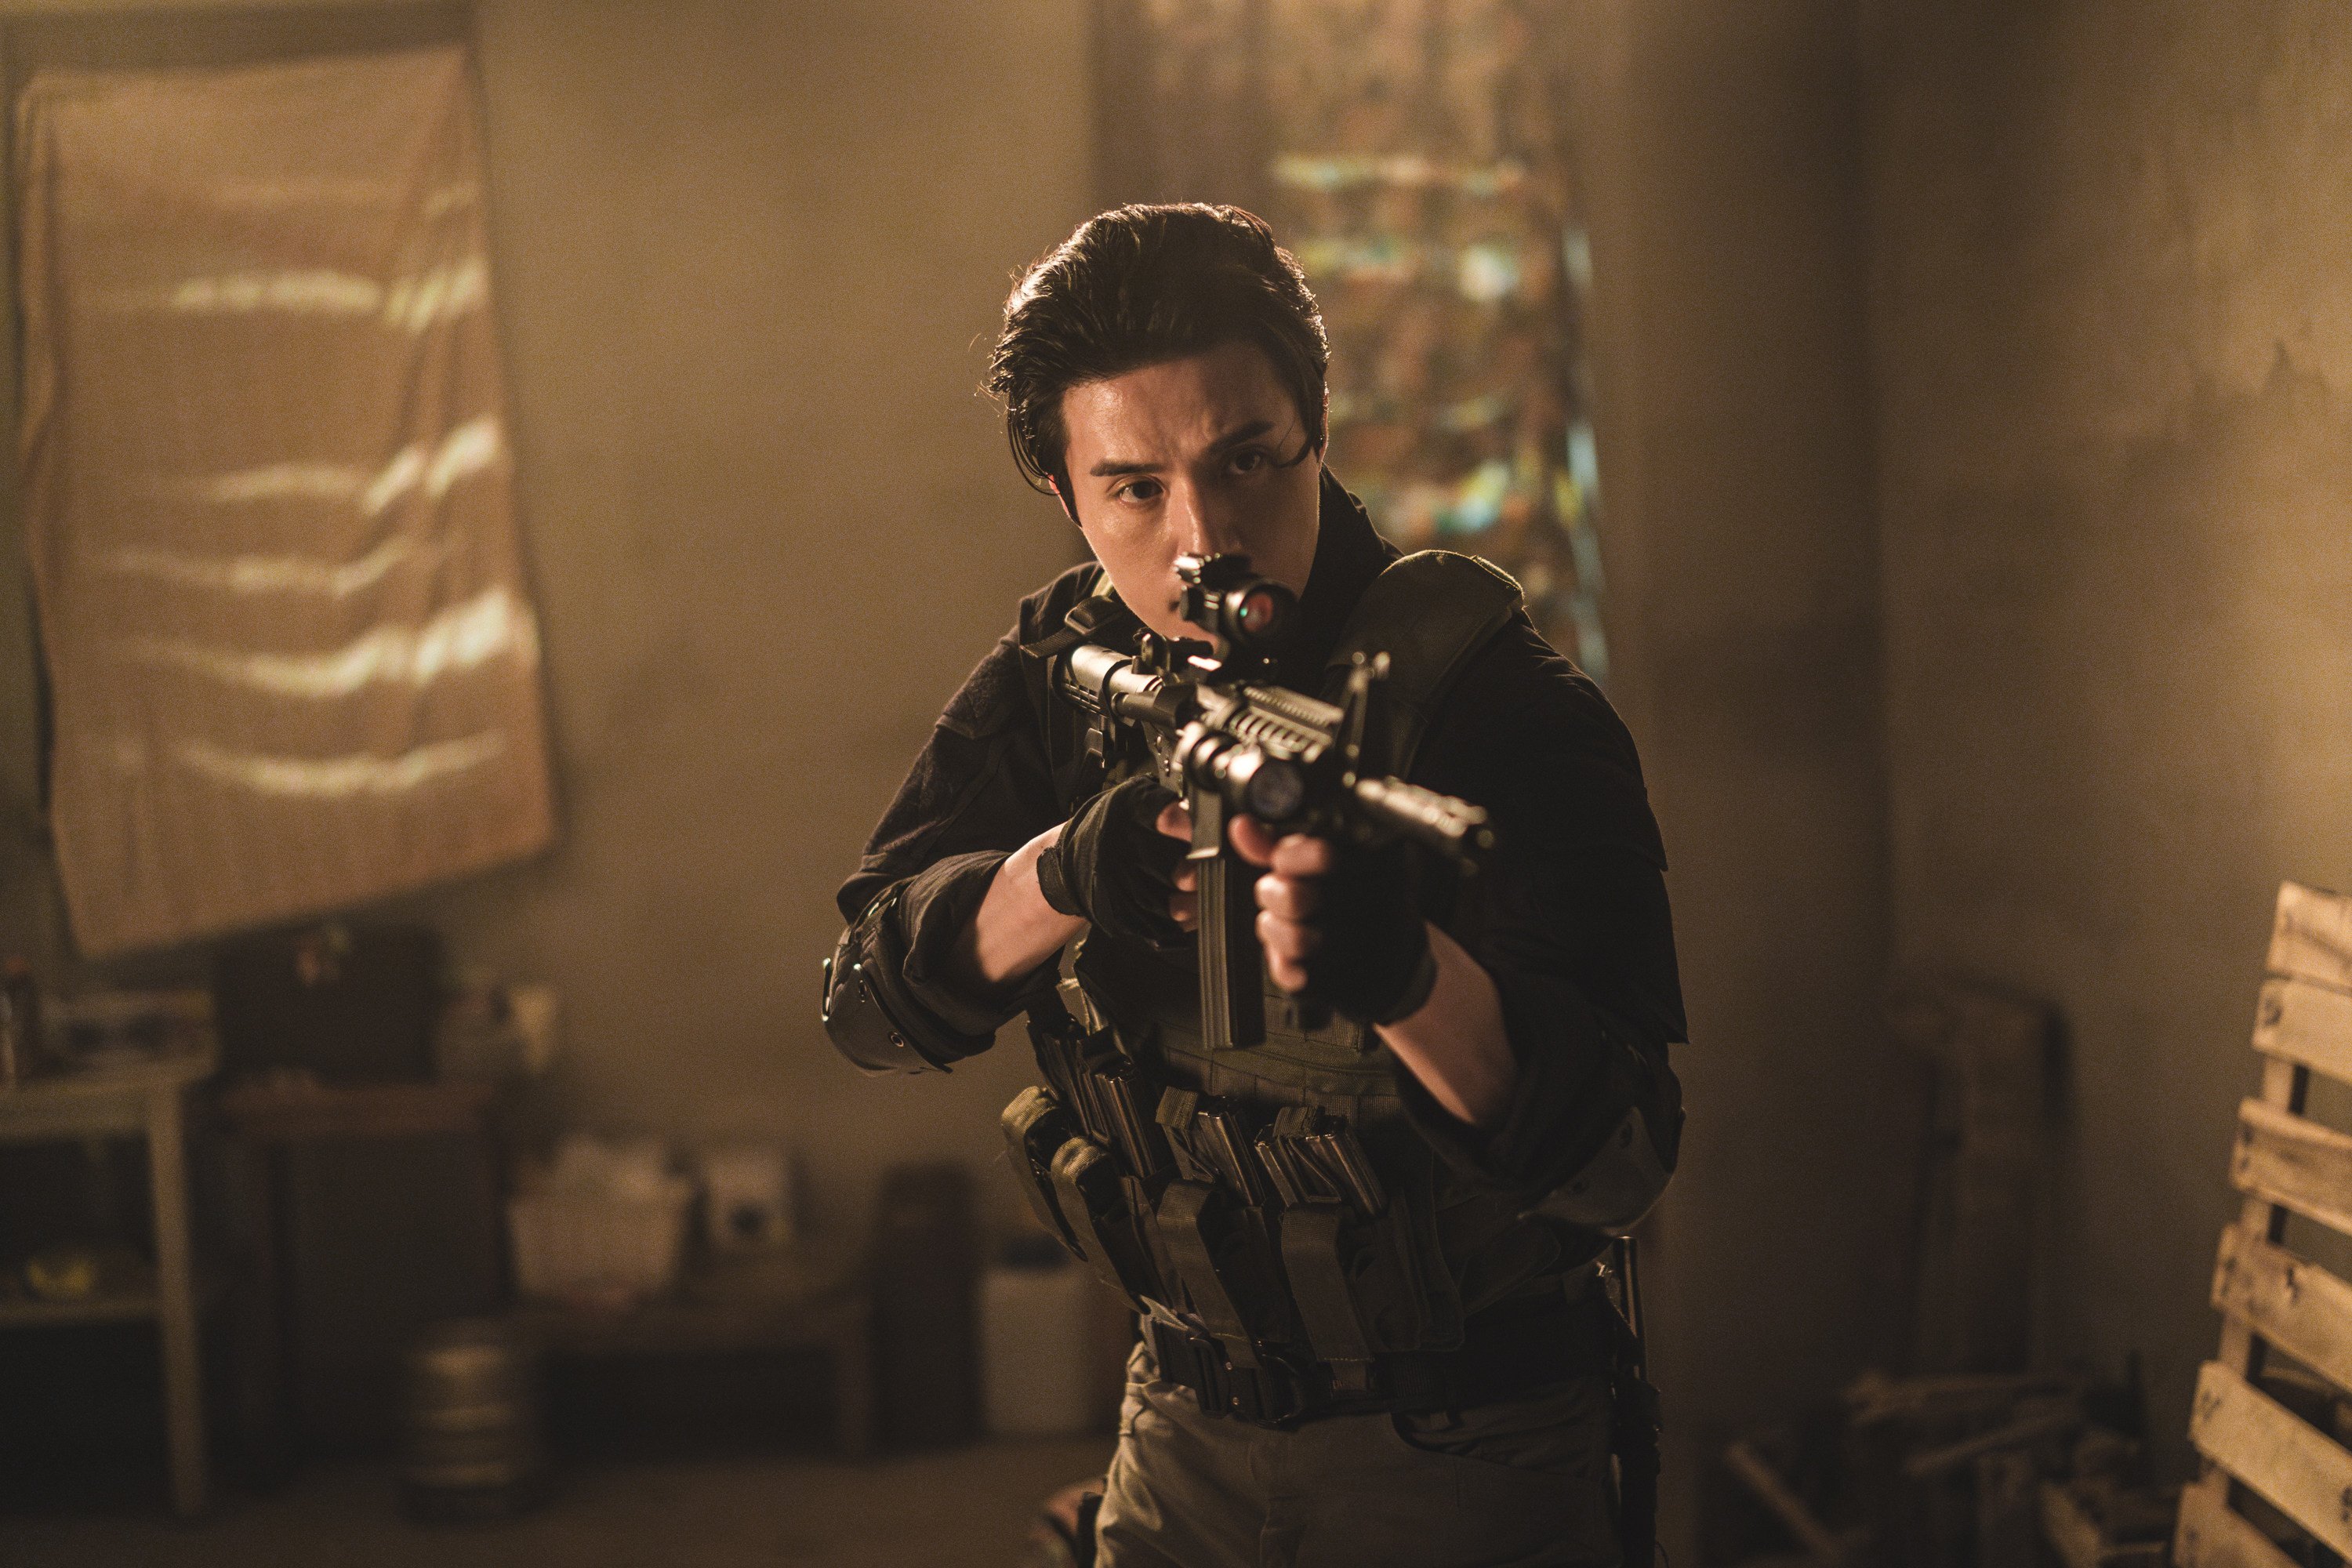 Lee Dong-wook in a still from A Shop for Killers. Photo: Disney+